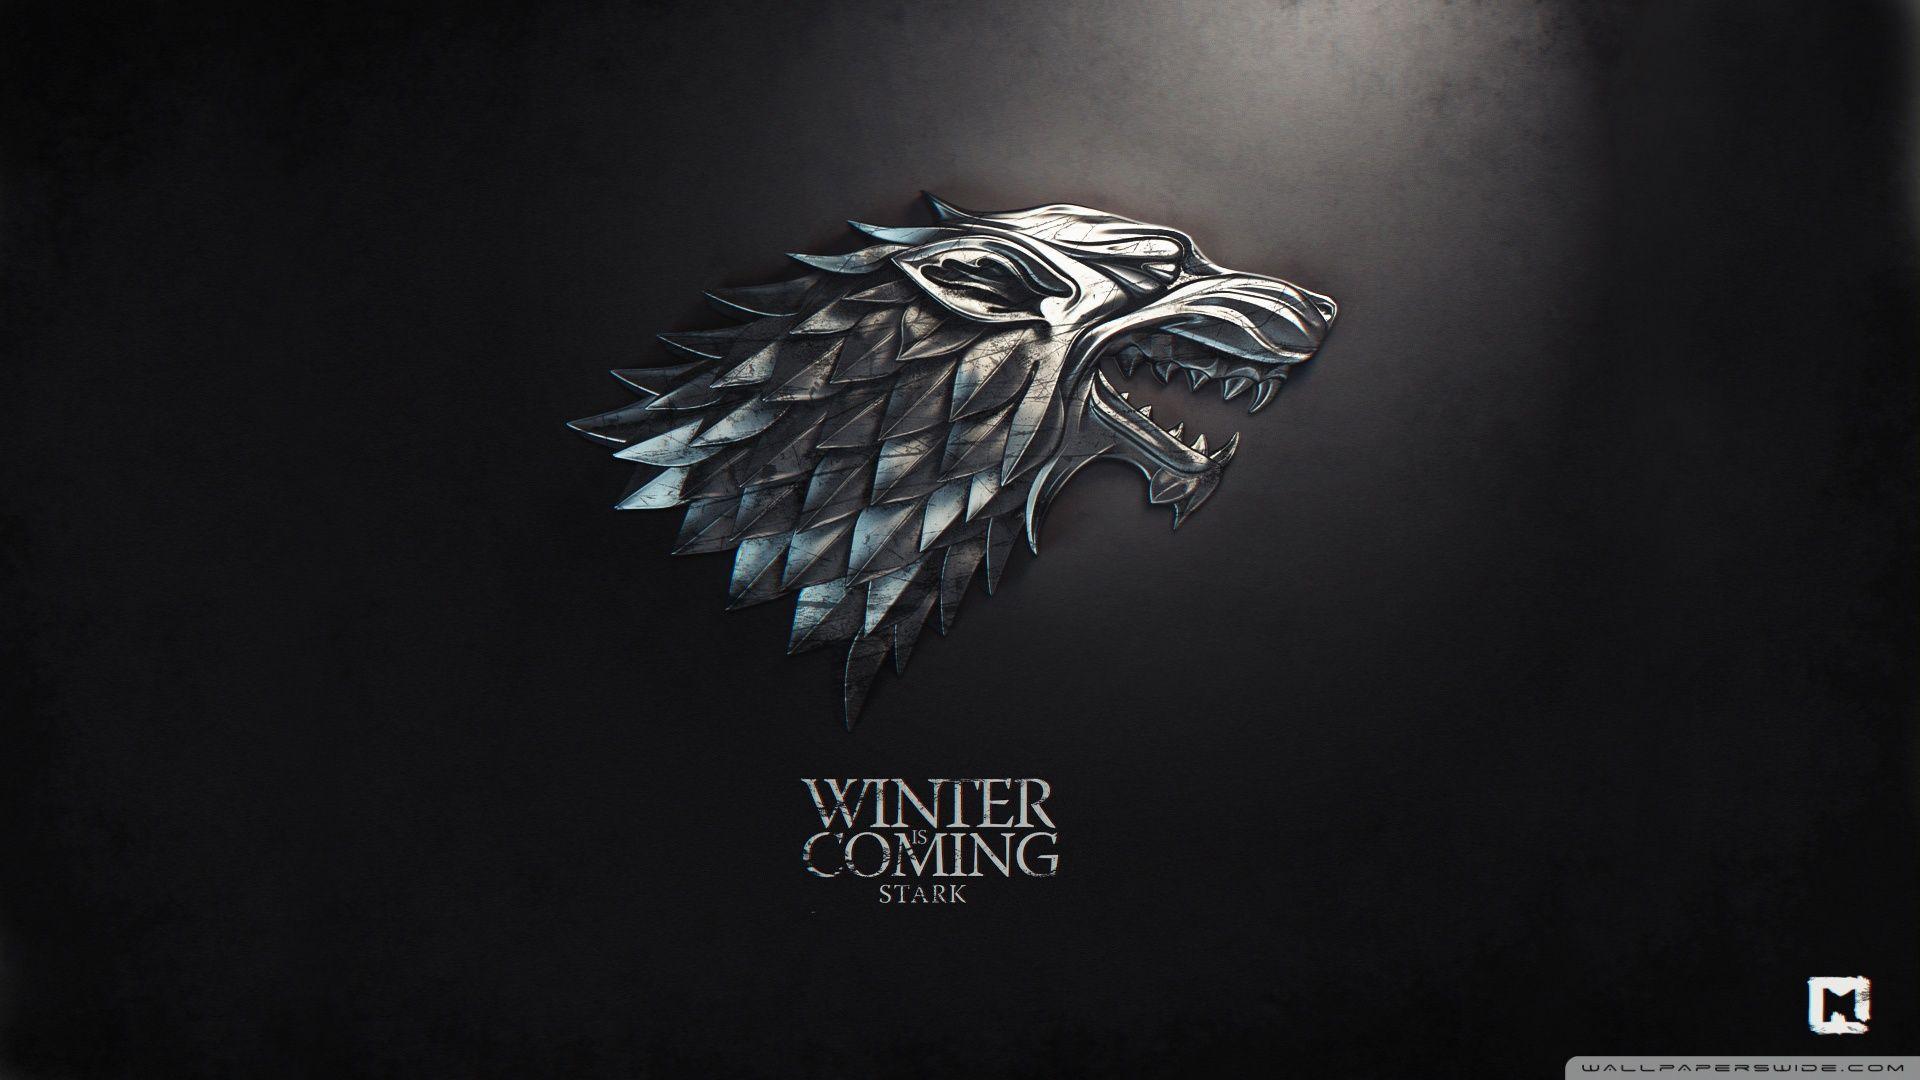 Game of Thrones Wallpapers - Top Free Game of Thrones ...